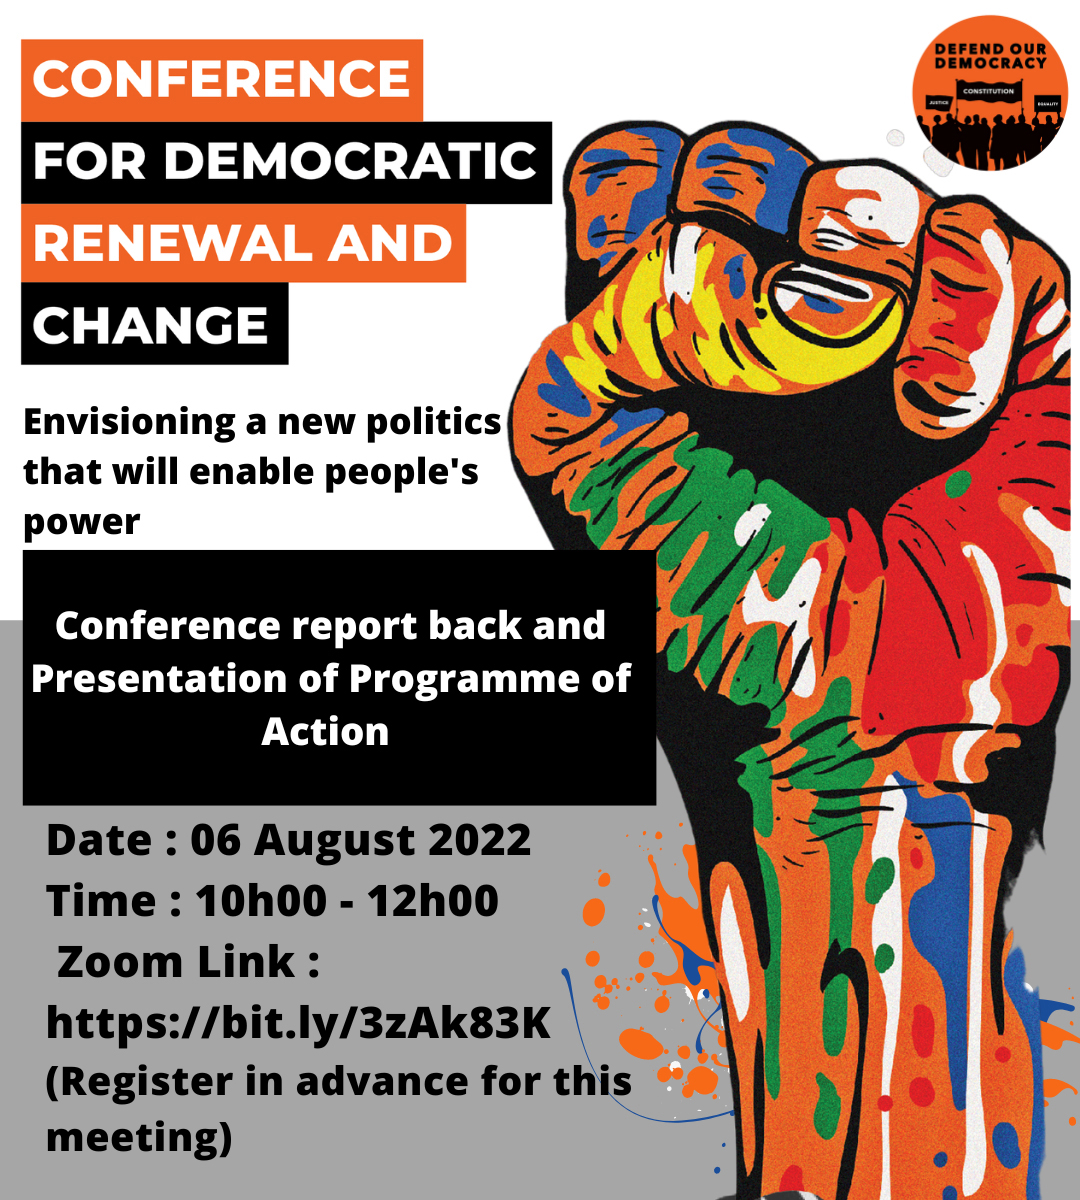 Conference for Democratic Renewal and Change poster